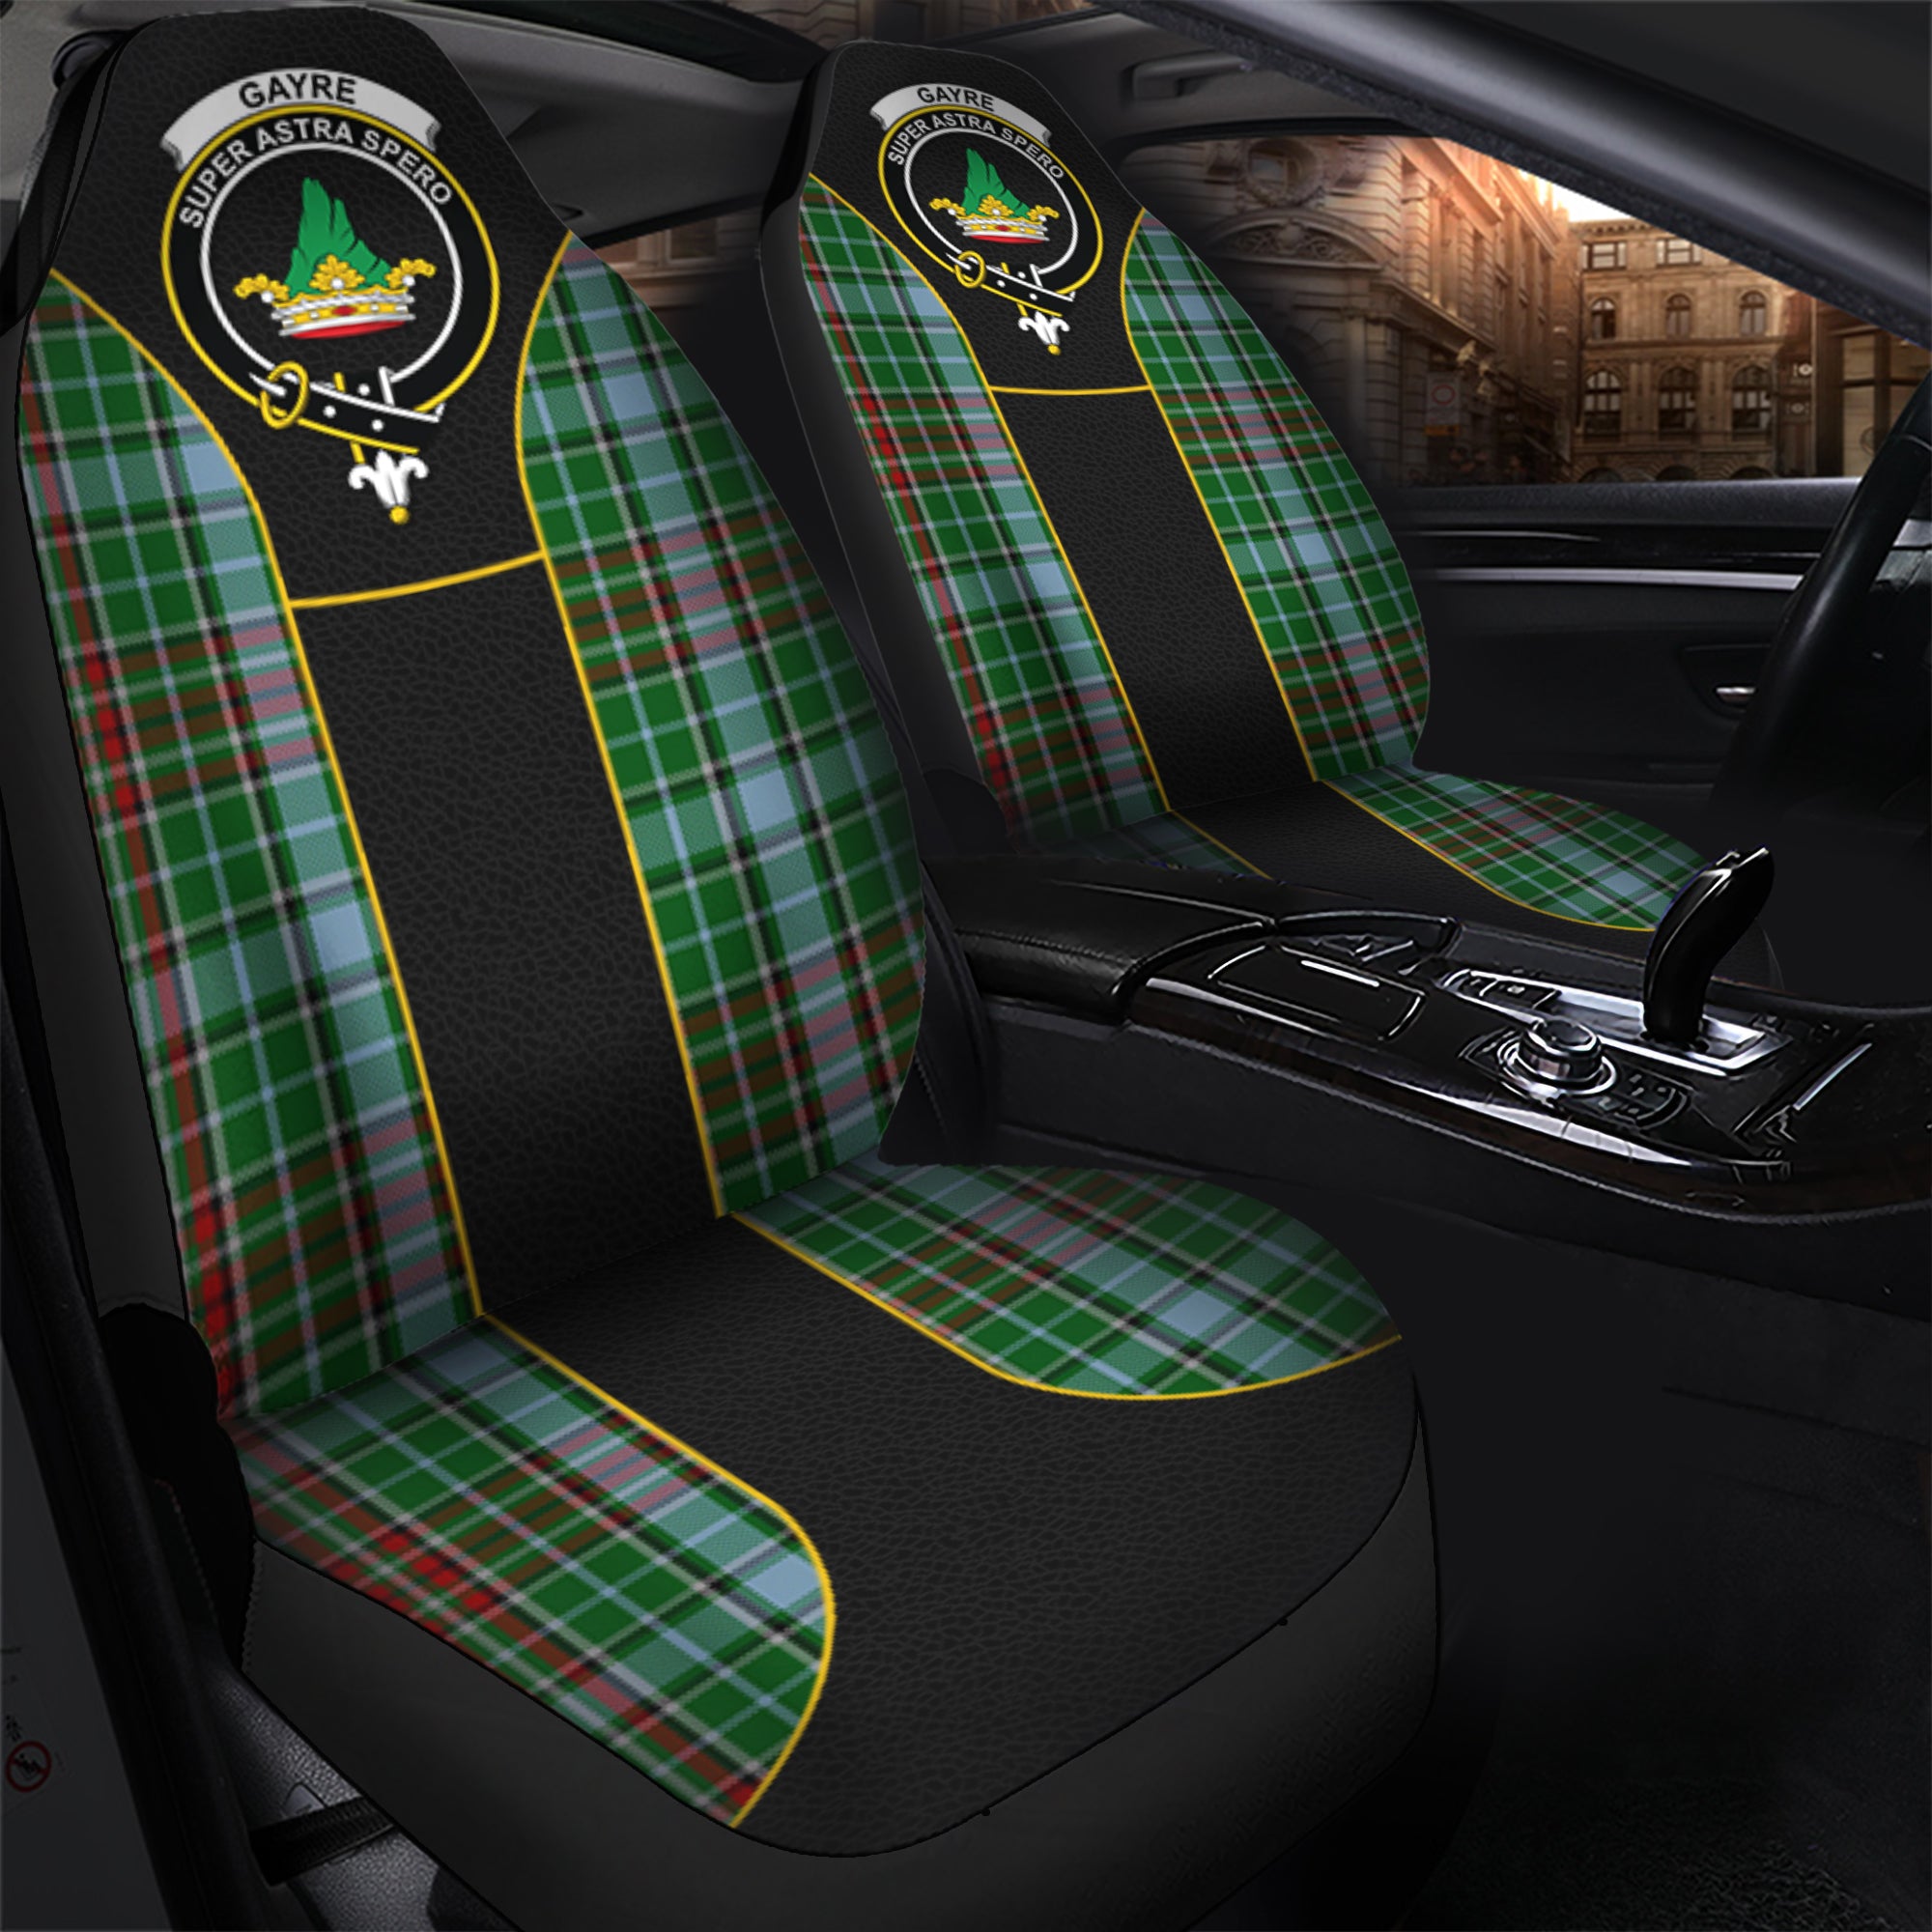 scottish-gayre-tartan-crest-car-seat-cover-special-style